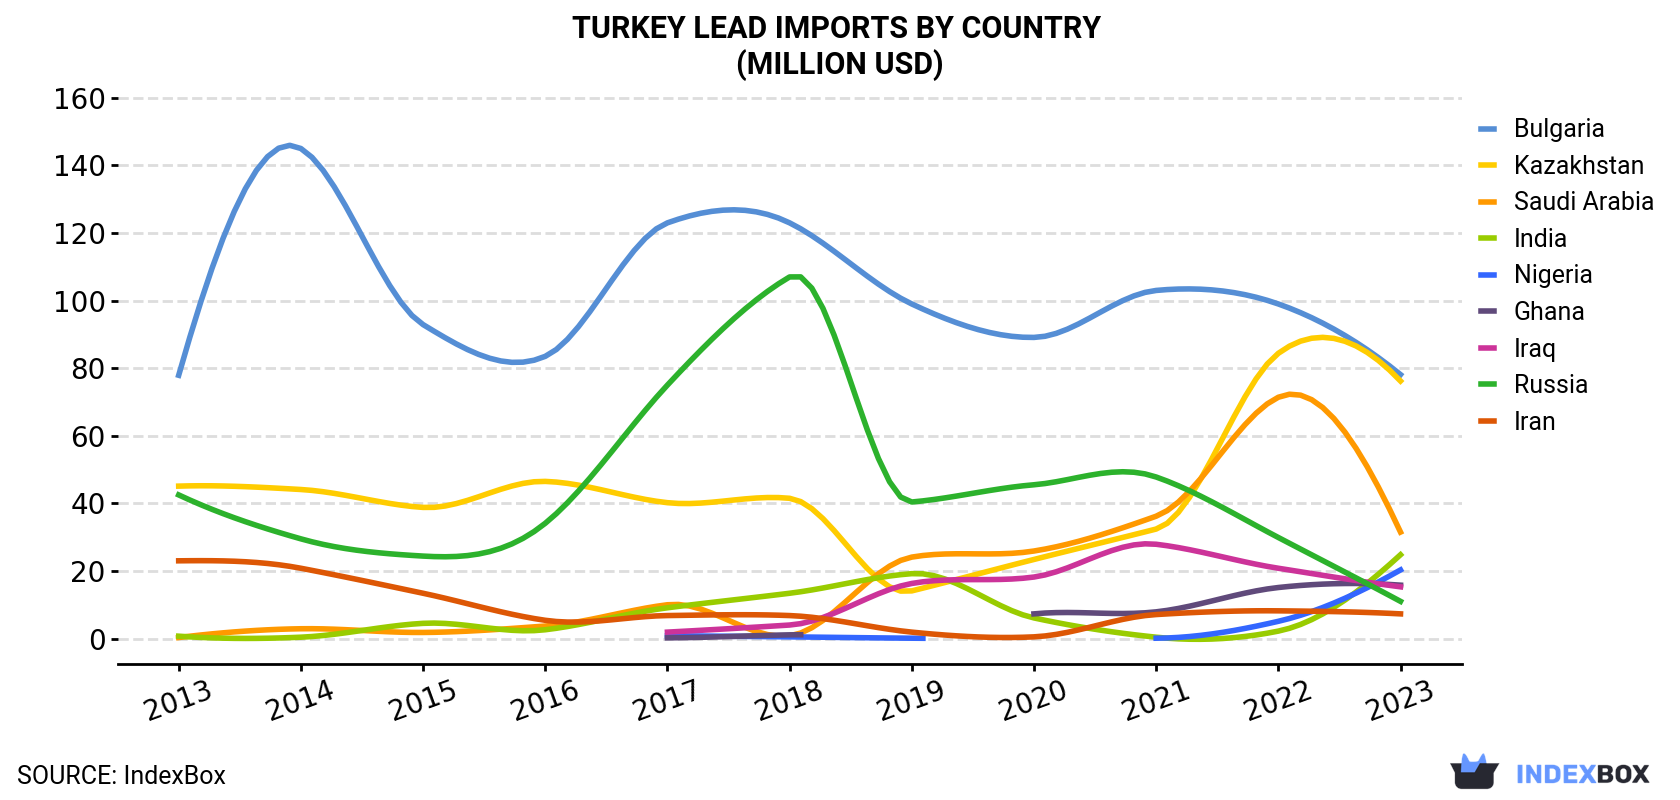 Turkey Lead Imports By Country (Million USD)